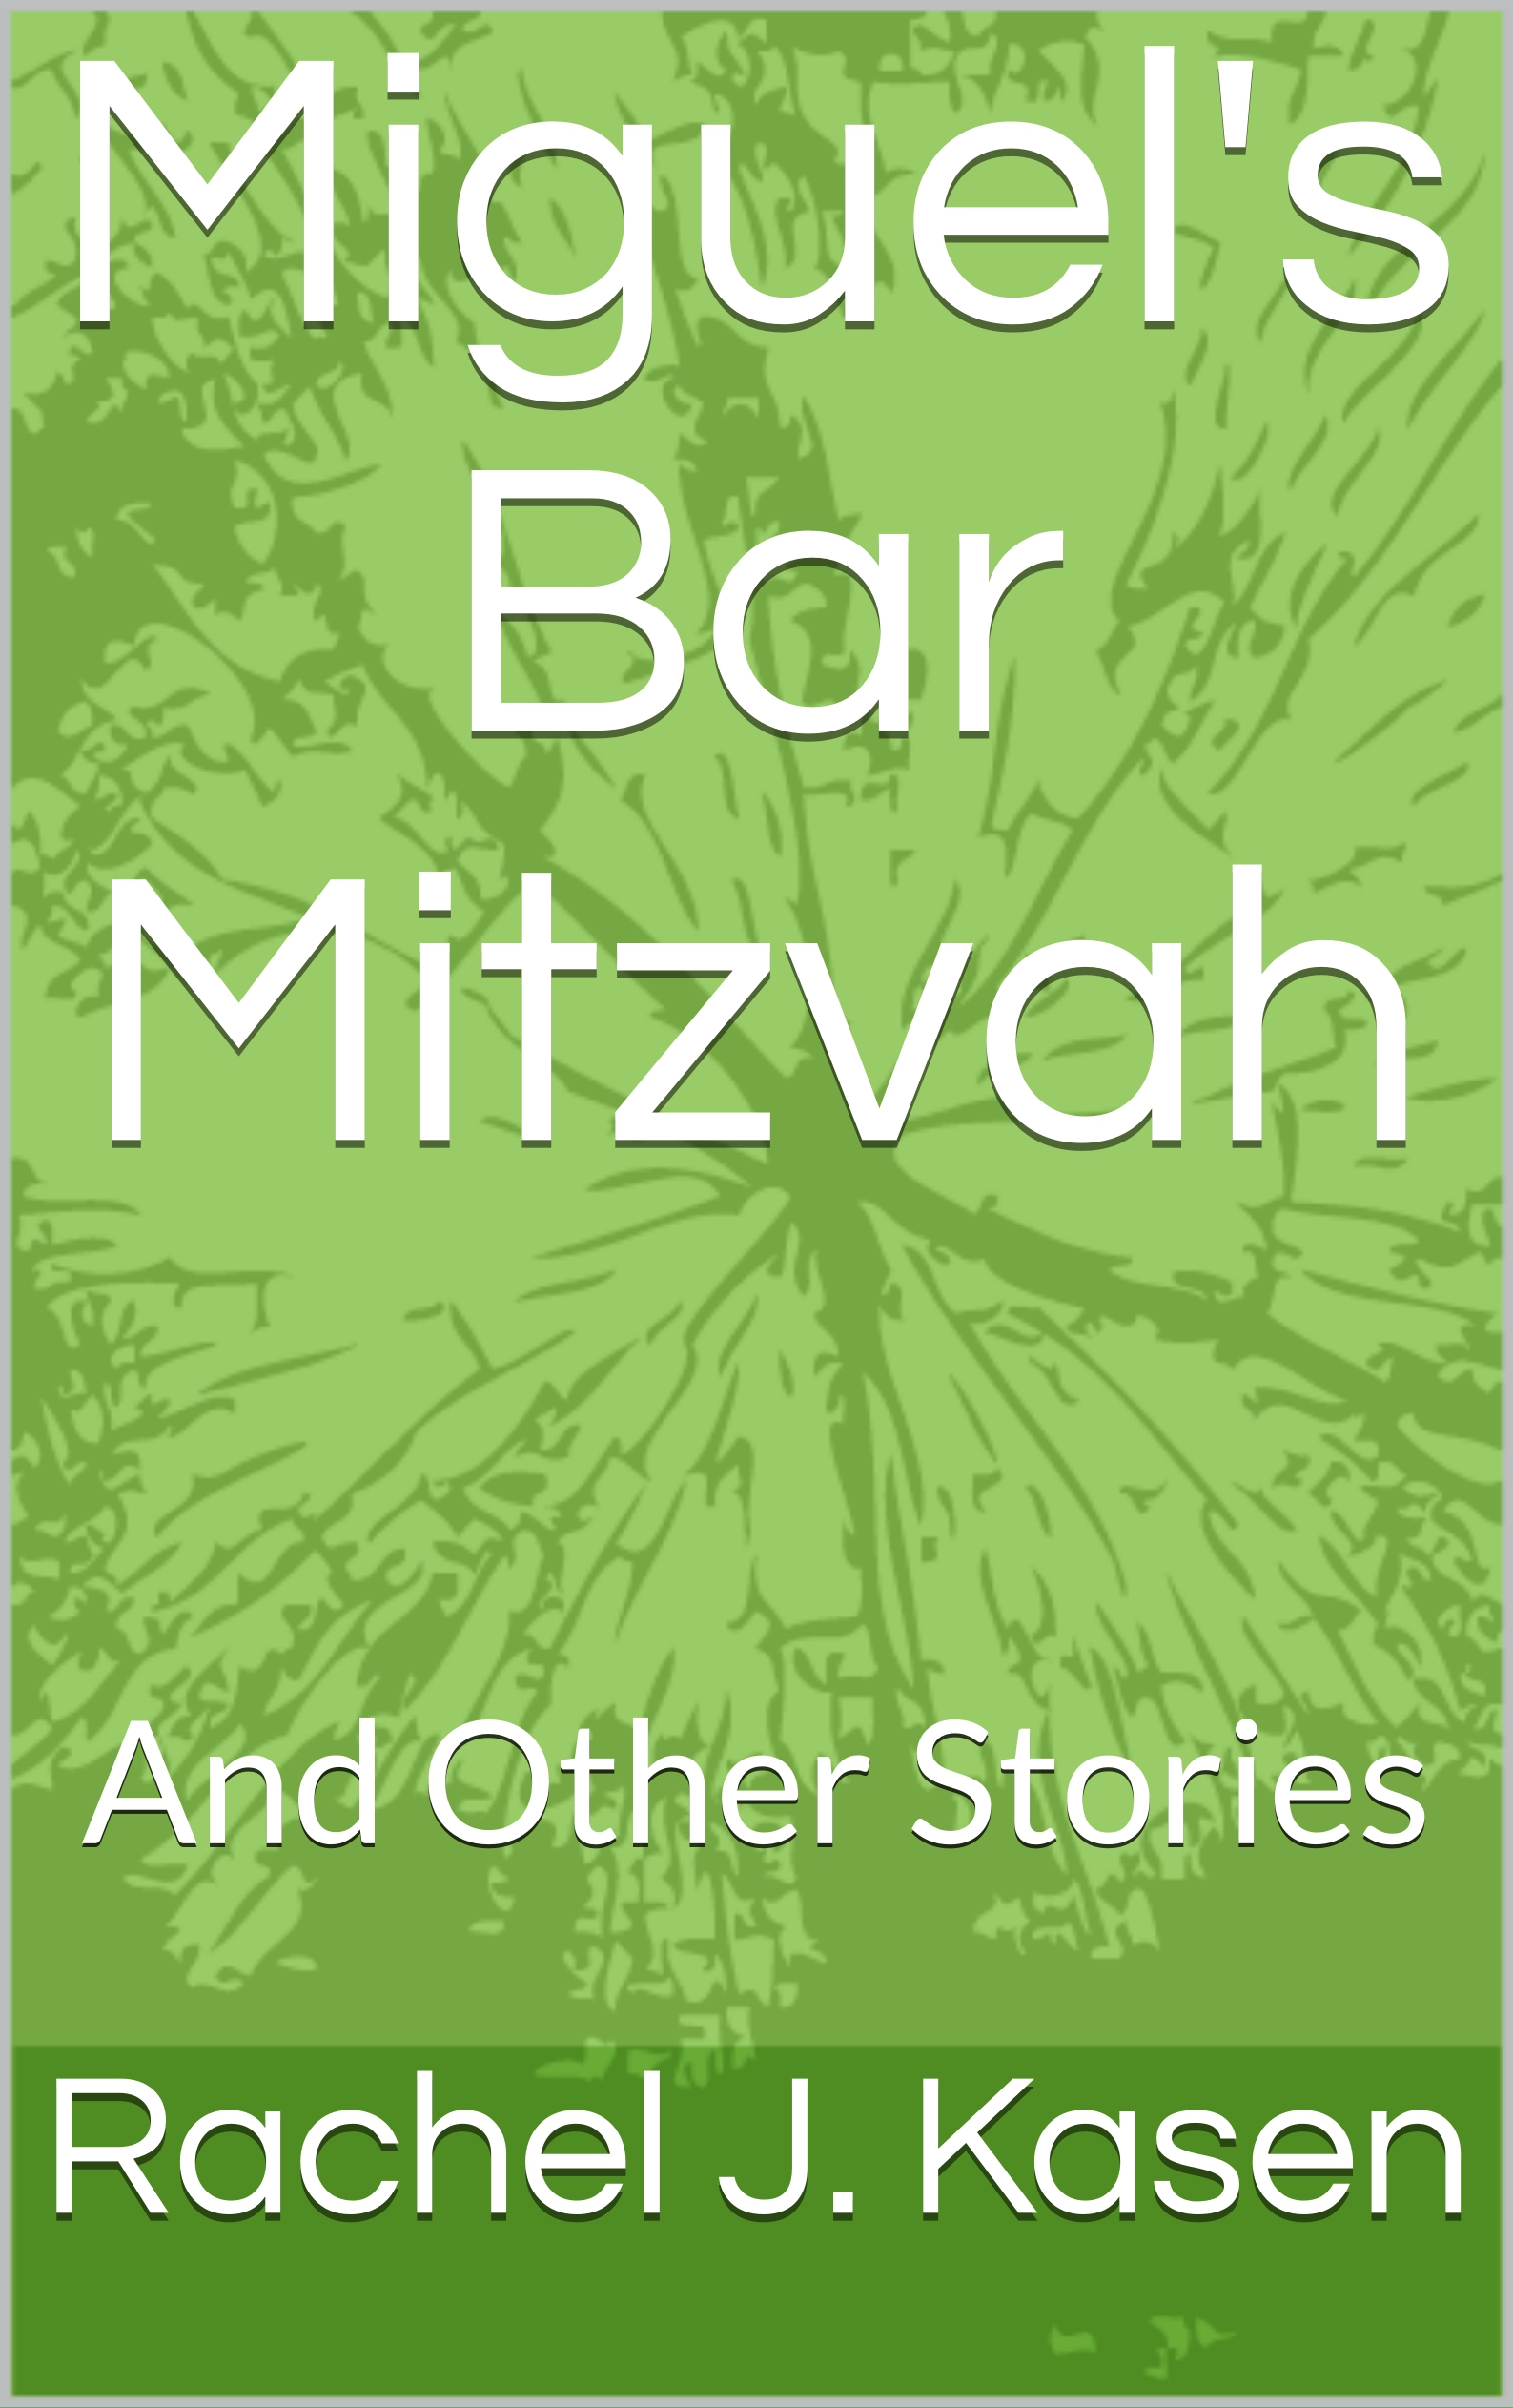 FREE: Miguel’s Bar Mitzvah and Other Stories by Rachel J. Kasen